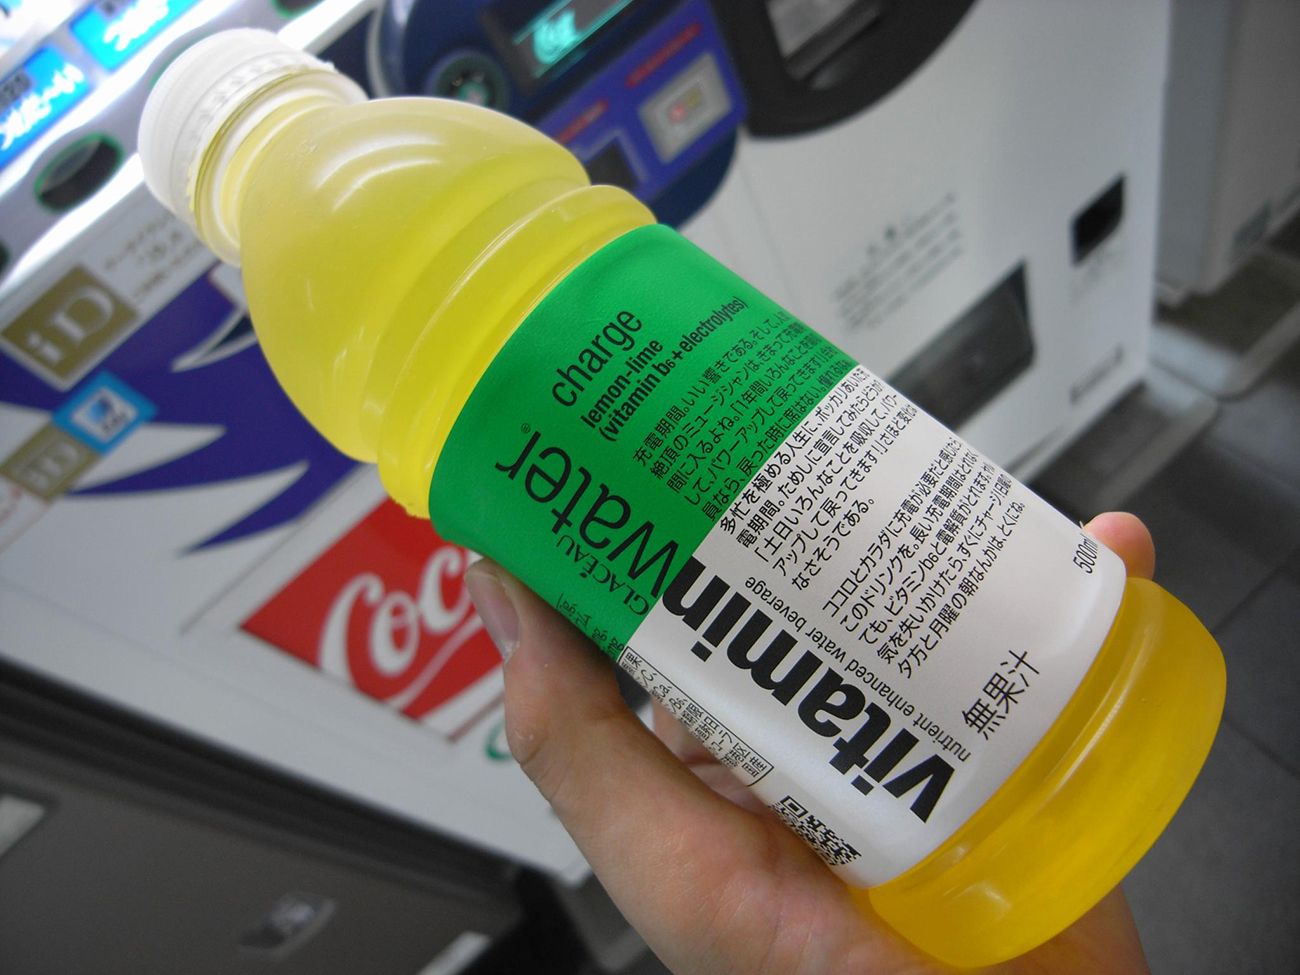 A photograph shows a person holding a bottle of Vitamin water. The label is written in both English and Japanese lettering.